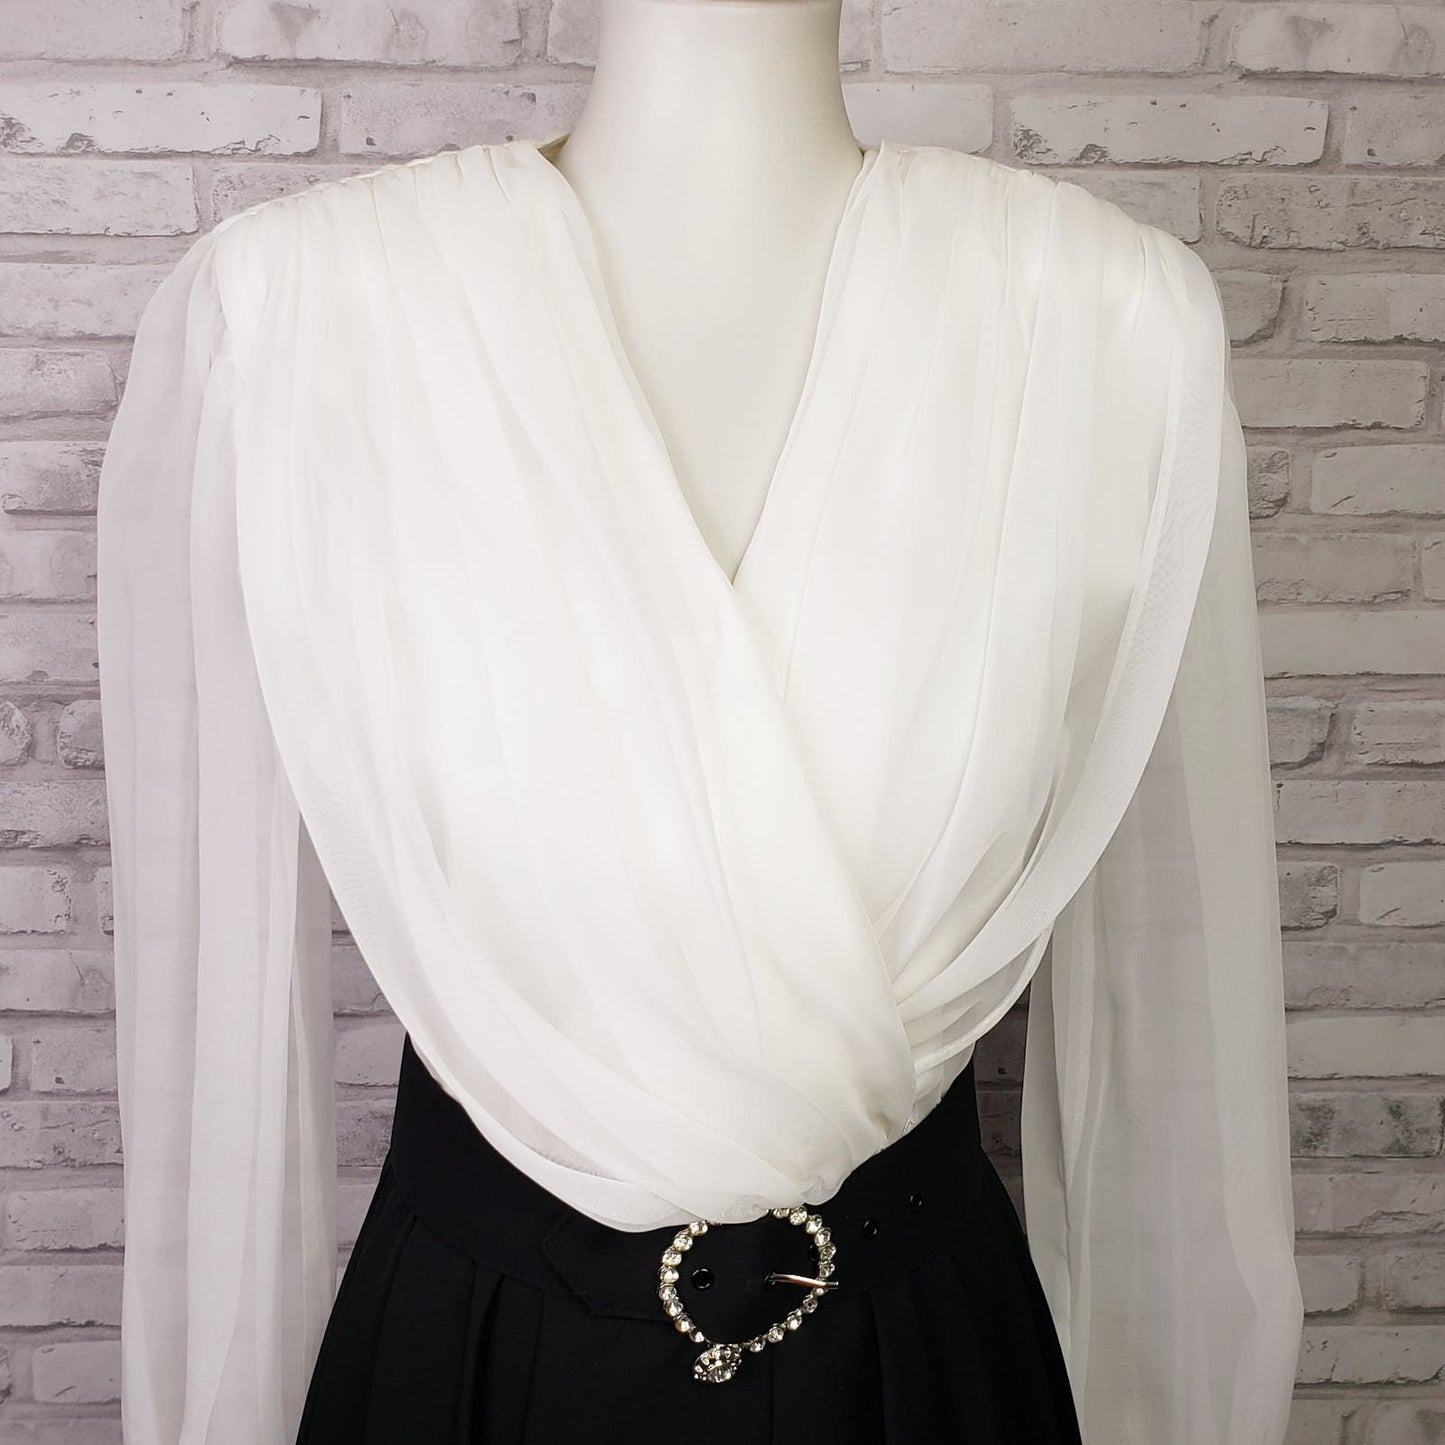 Vintage 1980s cocktail dress white and black wrap-look mini, Positively Ellyn size 4 women's vintage 34-inch bust